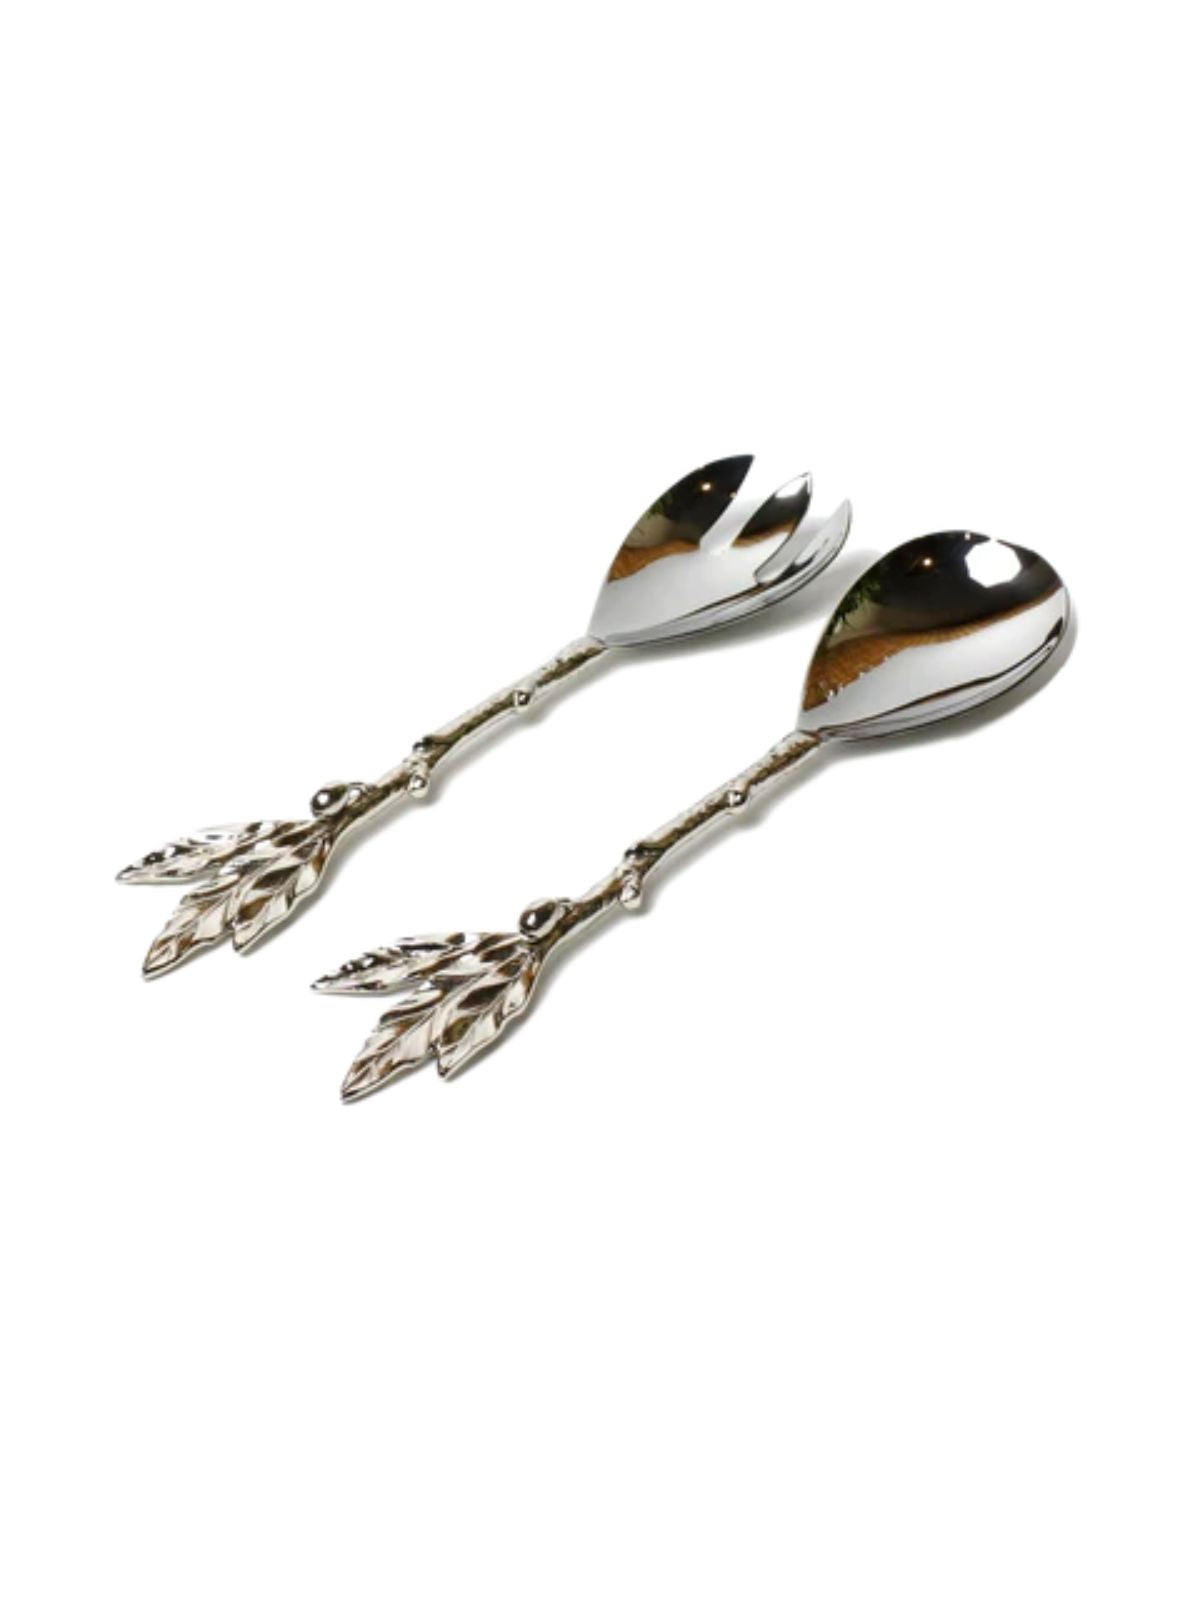 Crafted from high quality steel, this set of 12.5L serving utensils feature eye-catching hammered accented olive branch handles that complement virtually any type of home decor and tabletop. Sold by KYA Home Decor